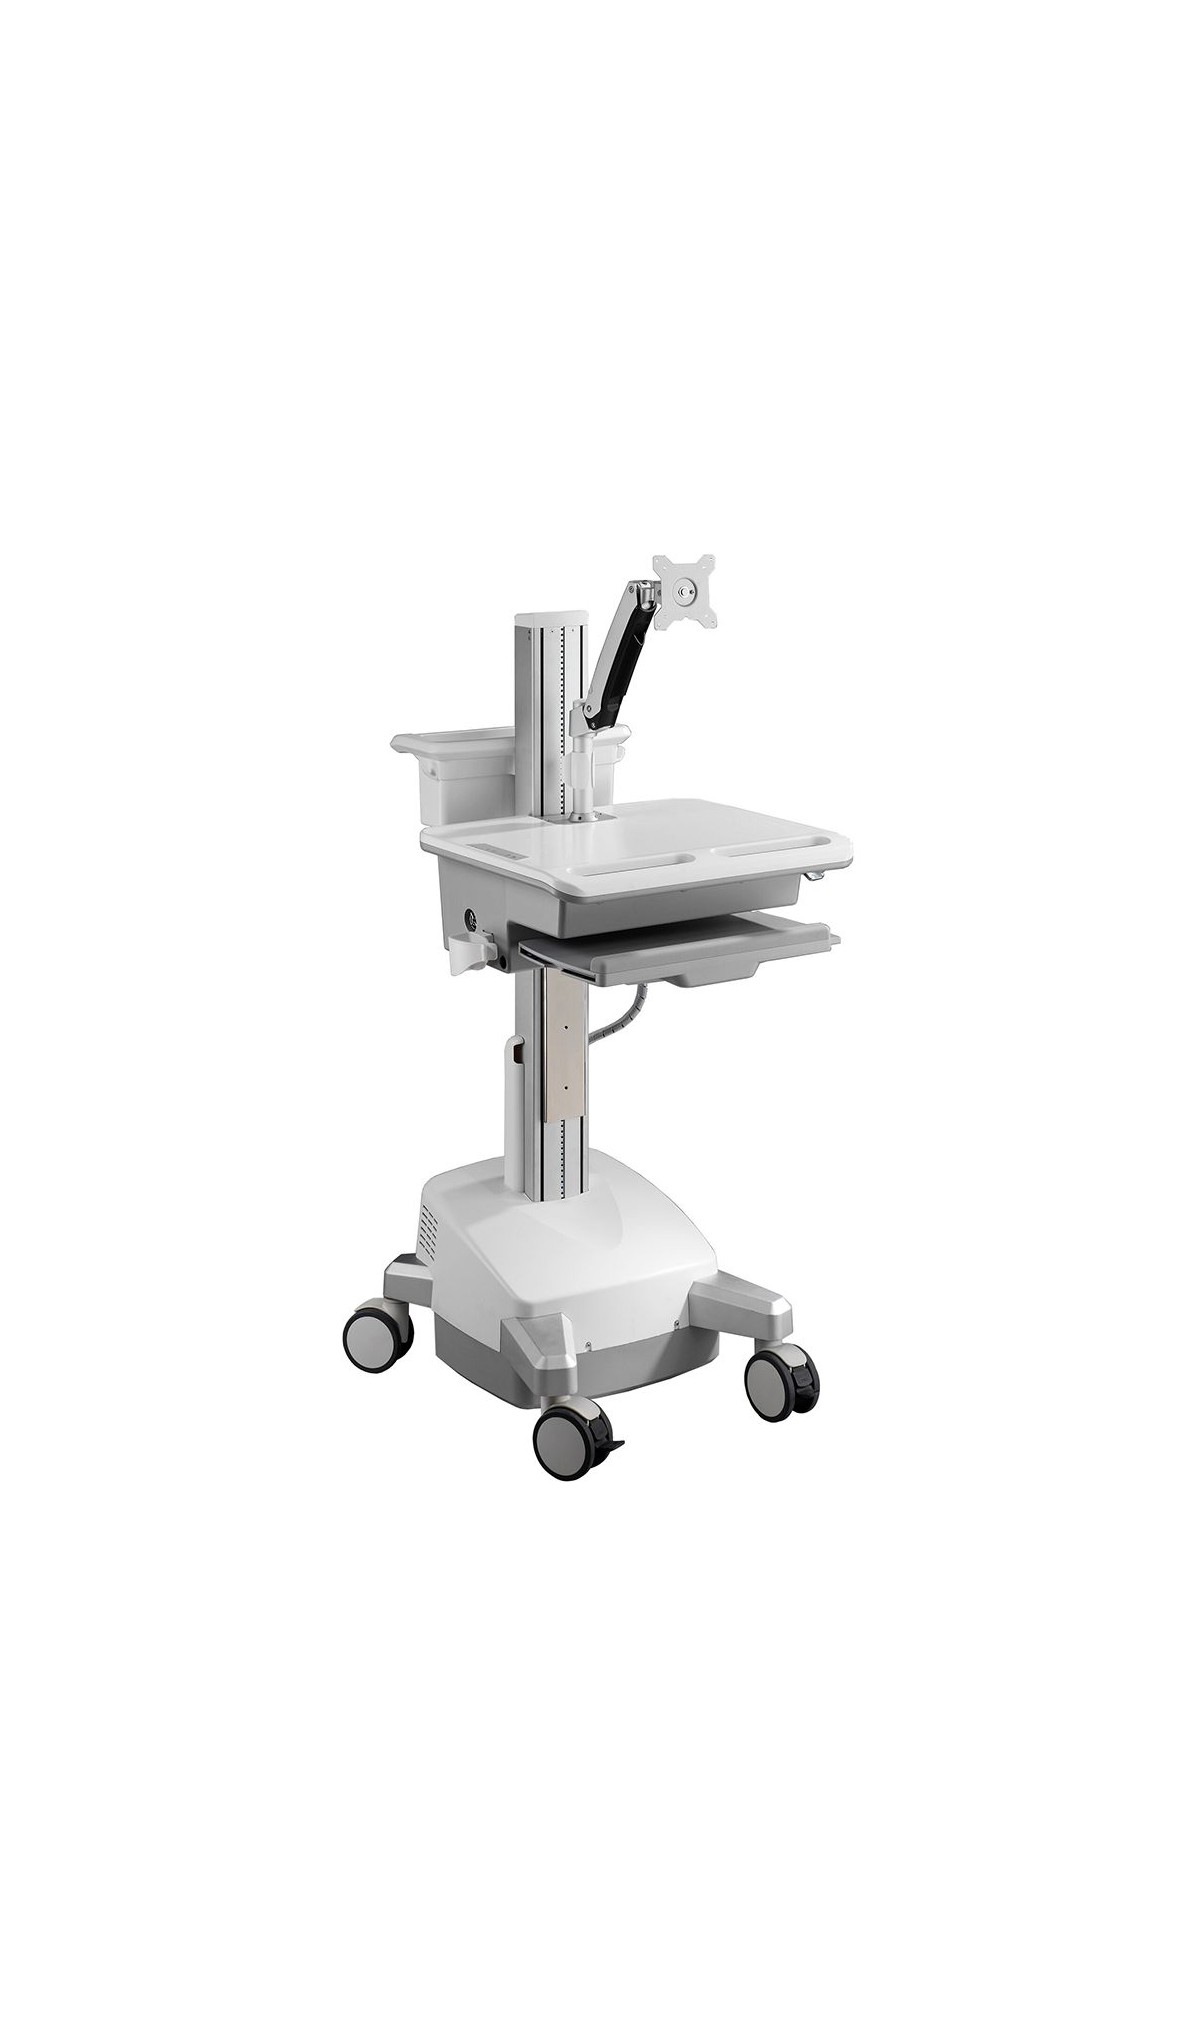 Aavara CER01 Powered Mobile Medical Cart with e-LIFT - Single Monitor Arm type